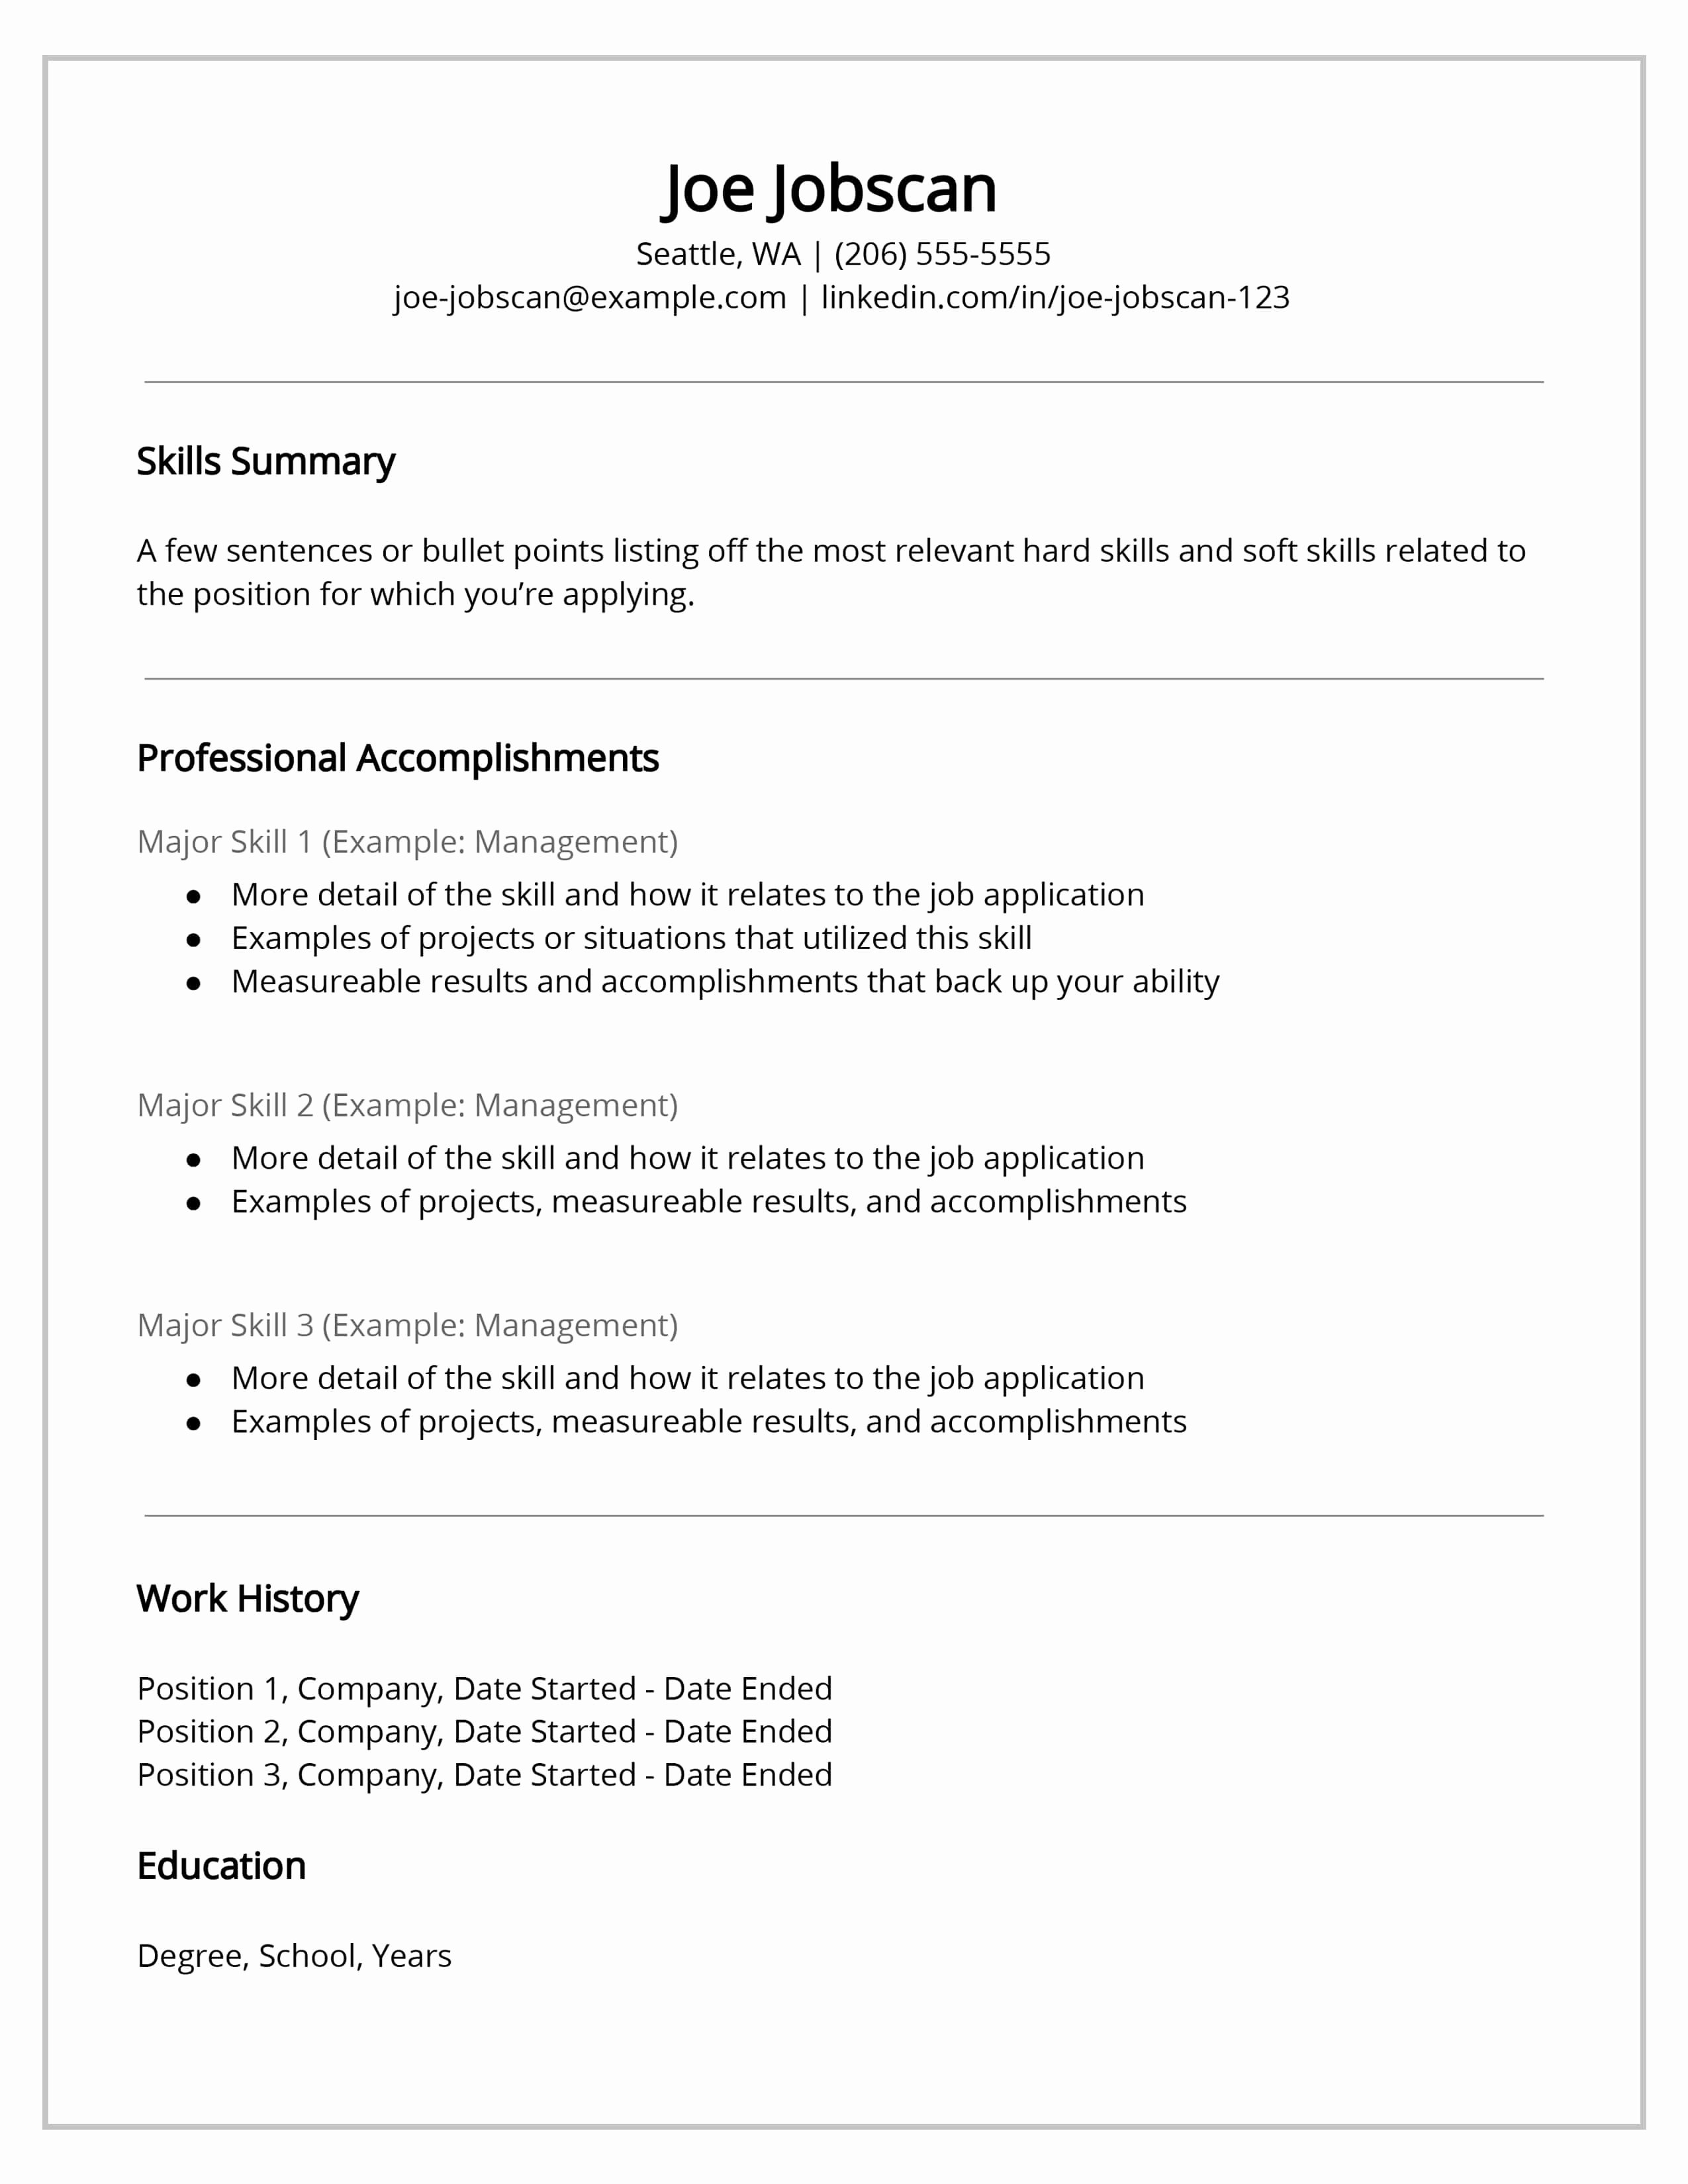 Free Functional Resume Template Awesome why Recruiters Hate the Functional Resume format Jobscan